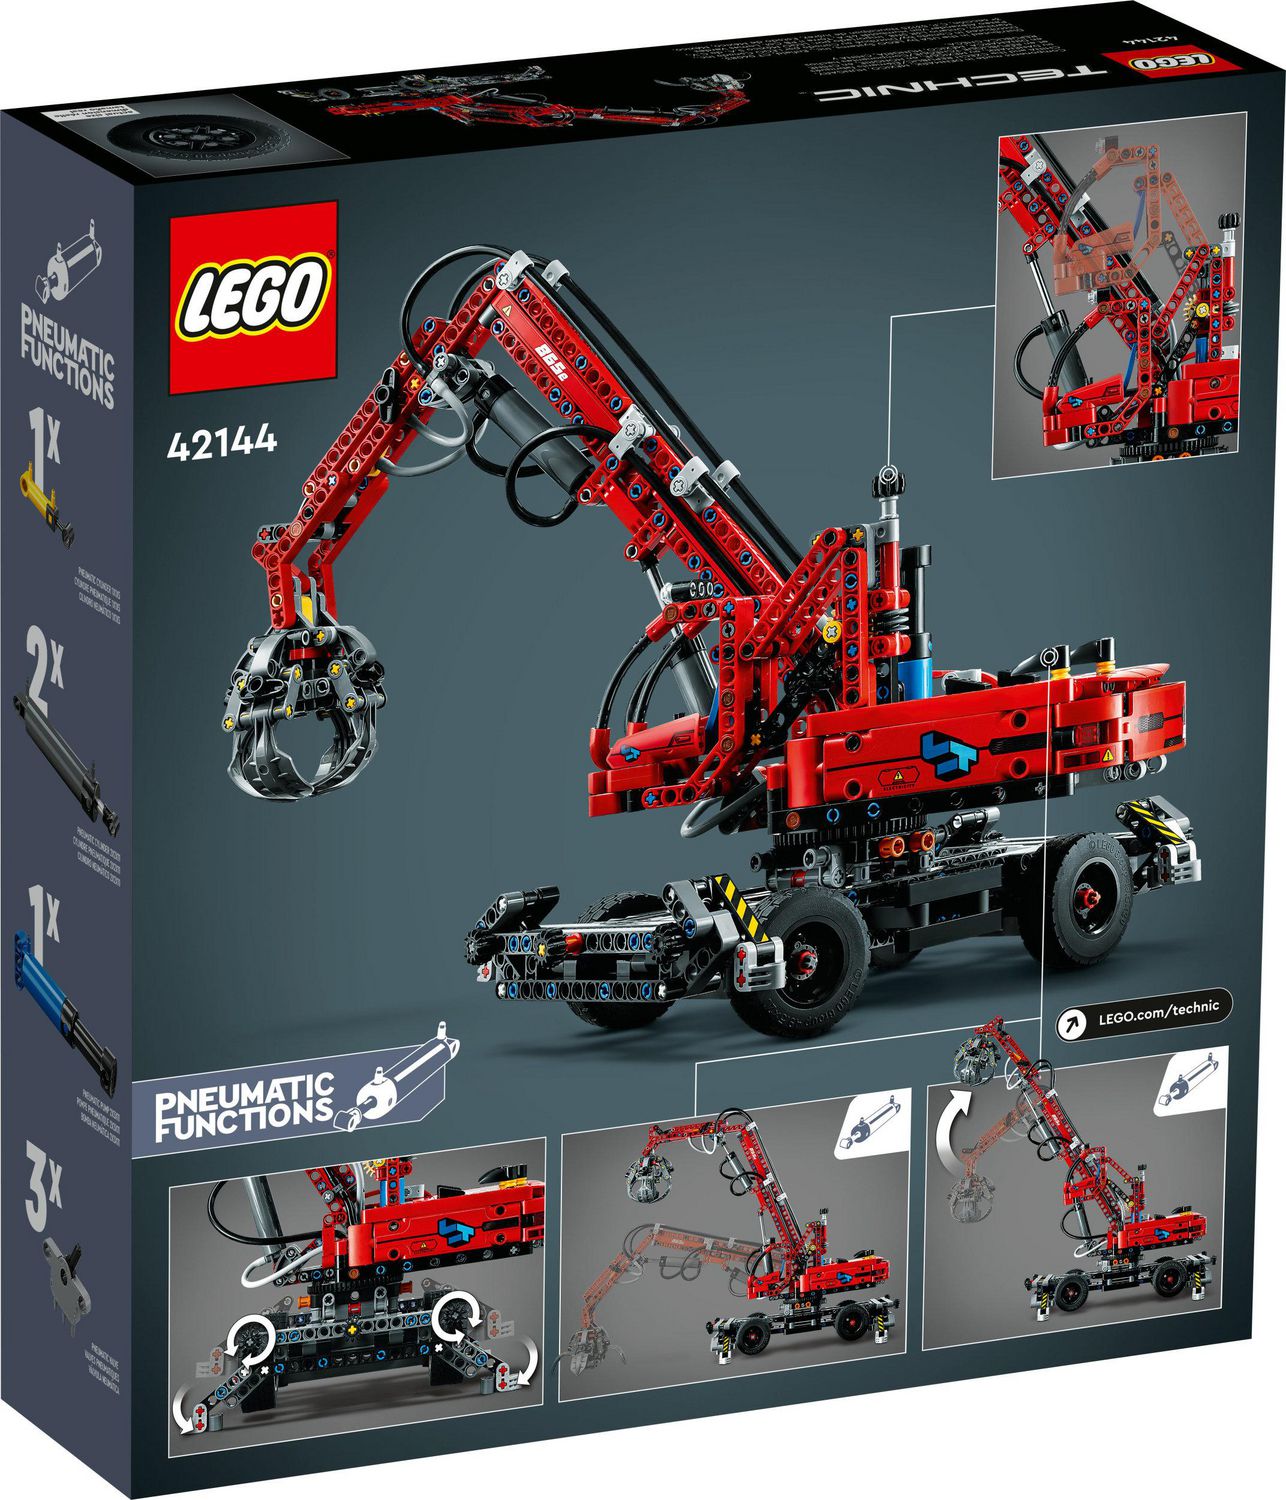 LEGO Technic Material Handler 42144, Mechanical Model Crane Toy, with  Manual and Pneumatic Functions, Construction Truck Building Set,  Educational